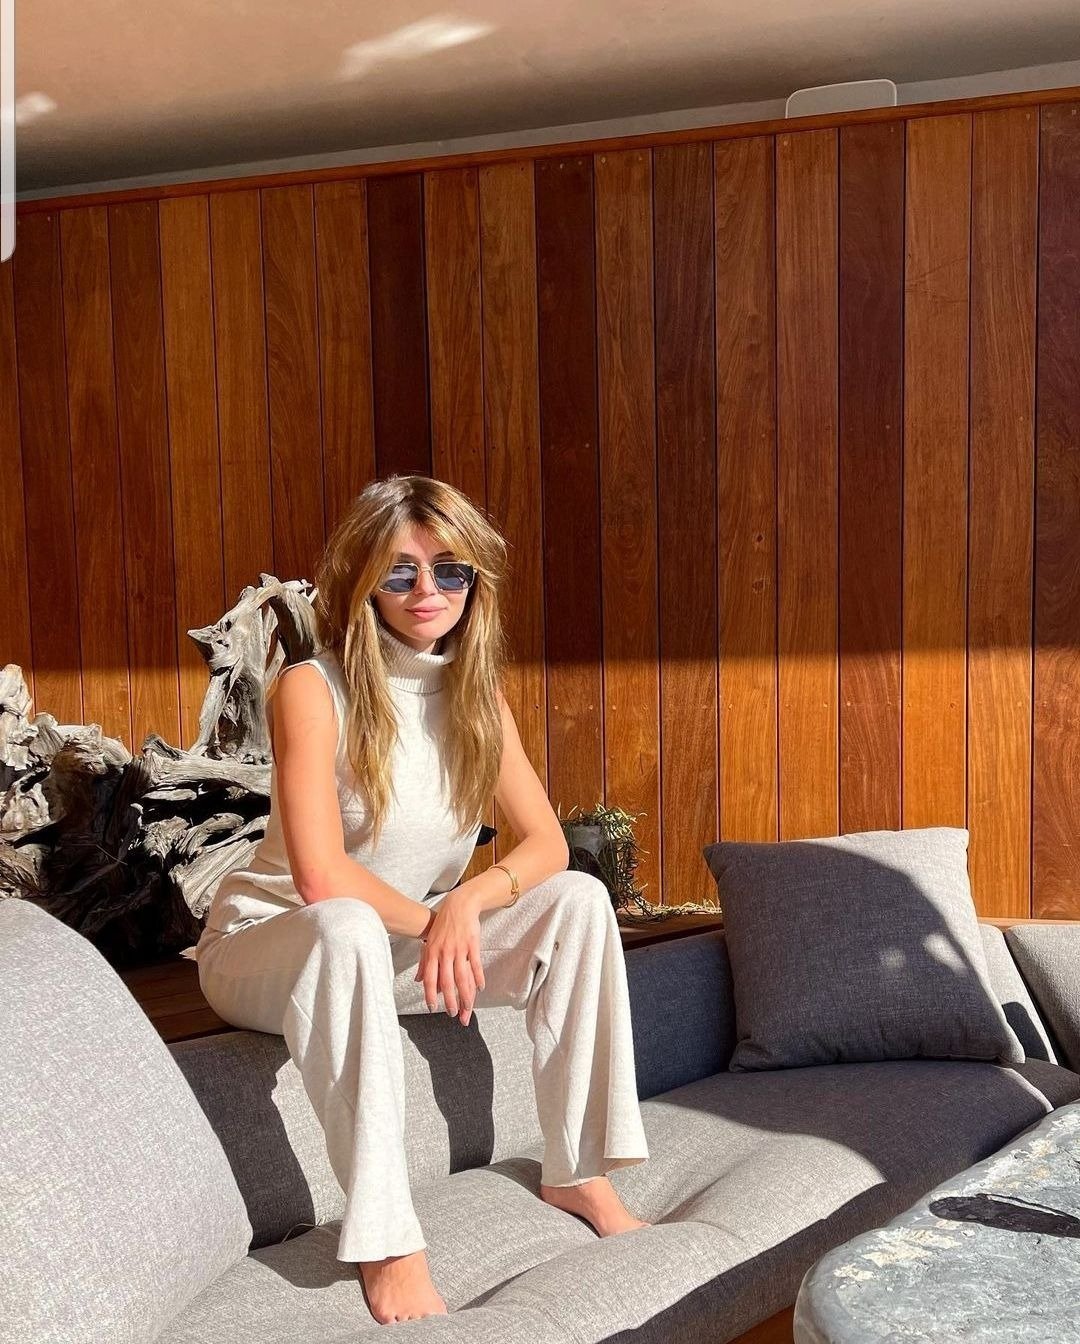 Olivia Jade Giannulli looks gorgeous in a white turtleneck jersey and matching pants, January, 2021. | Photo: Instagram/oliviajade.